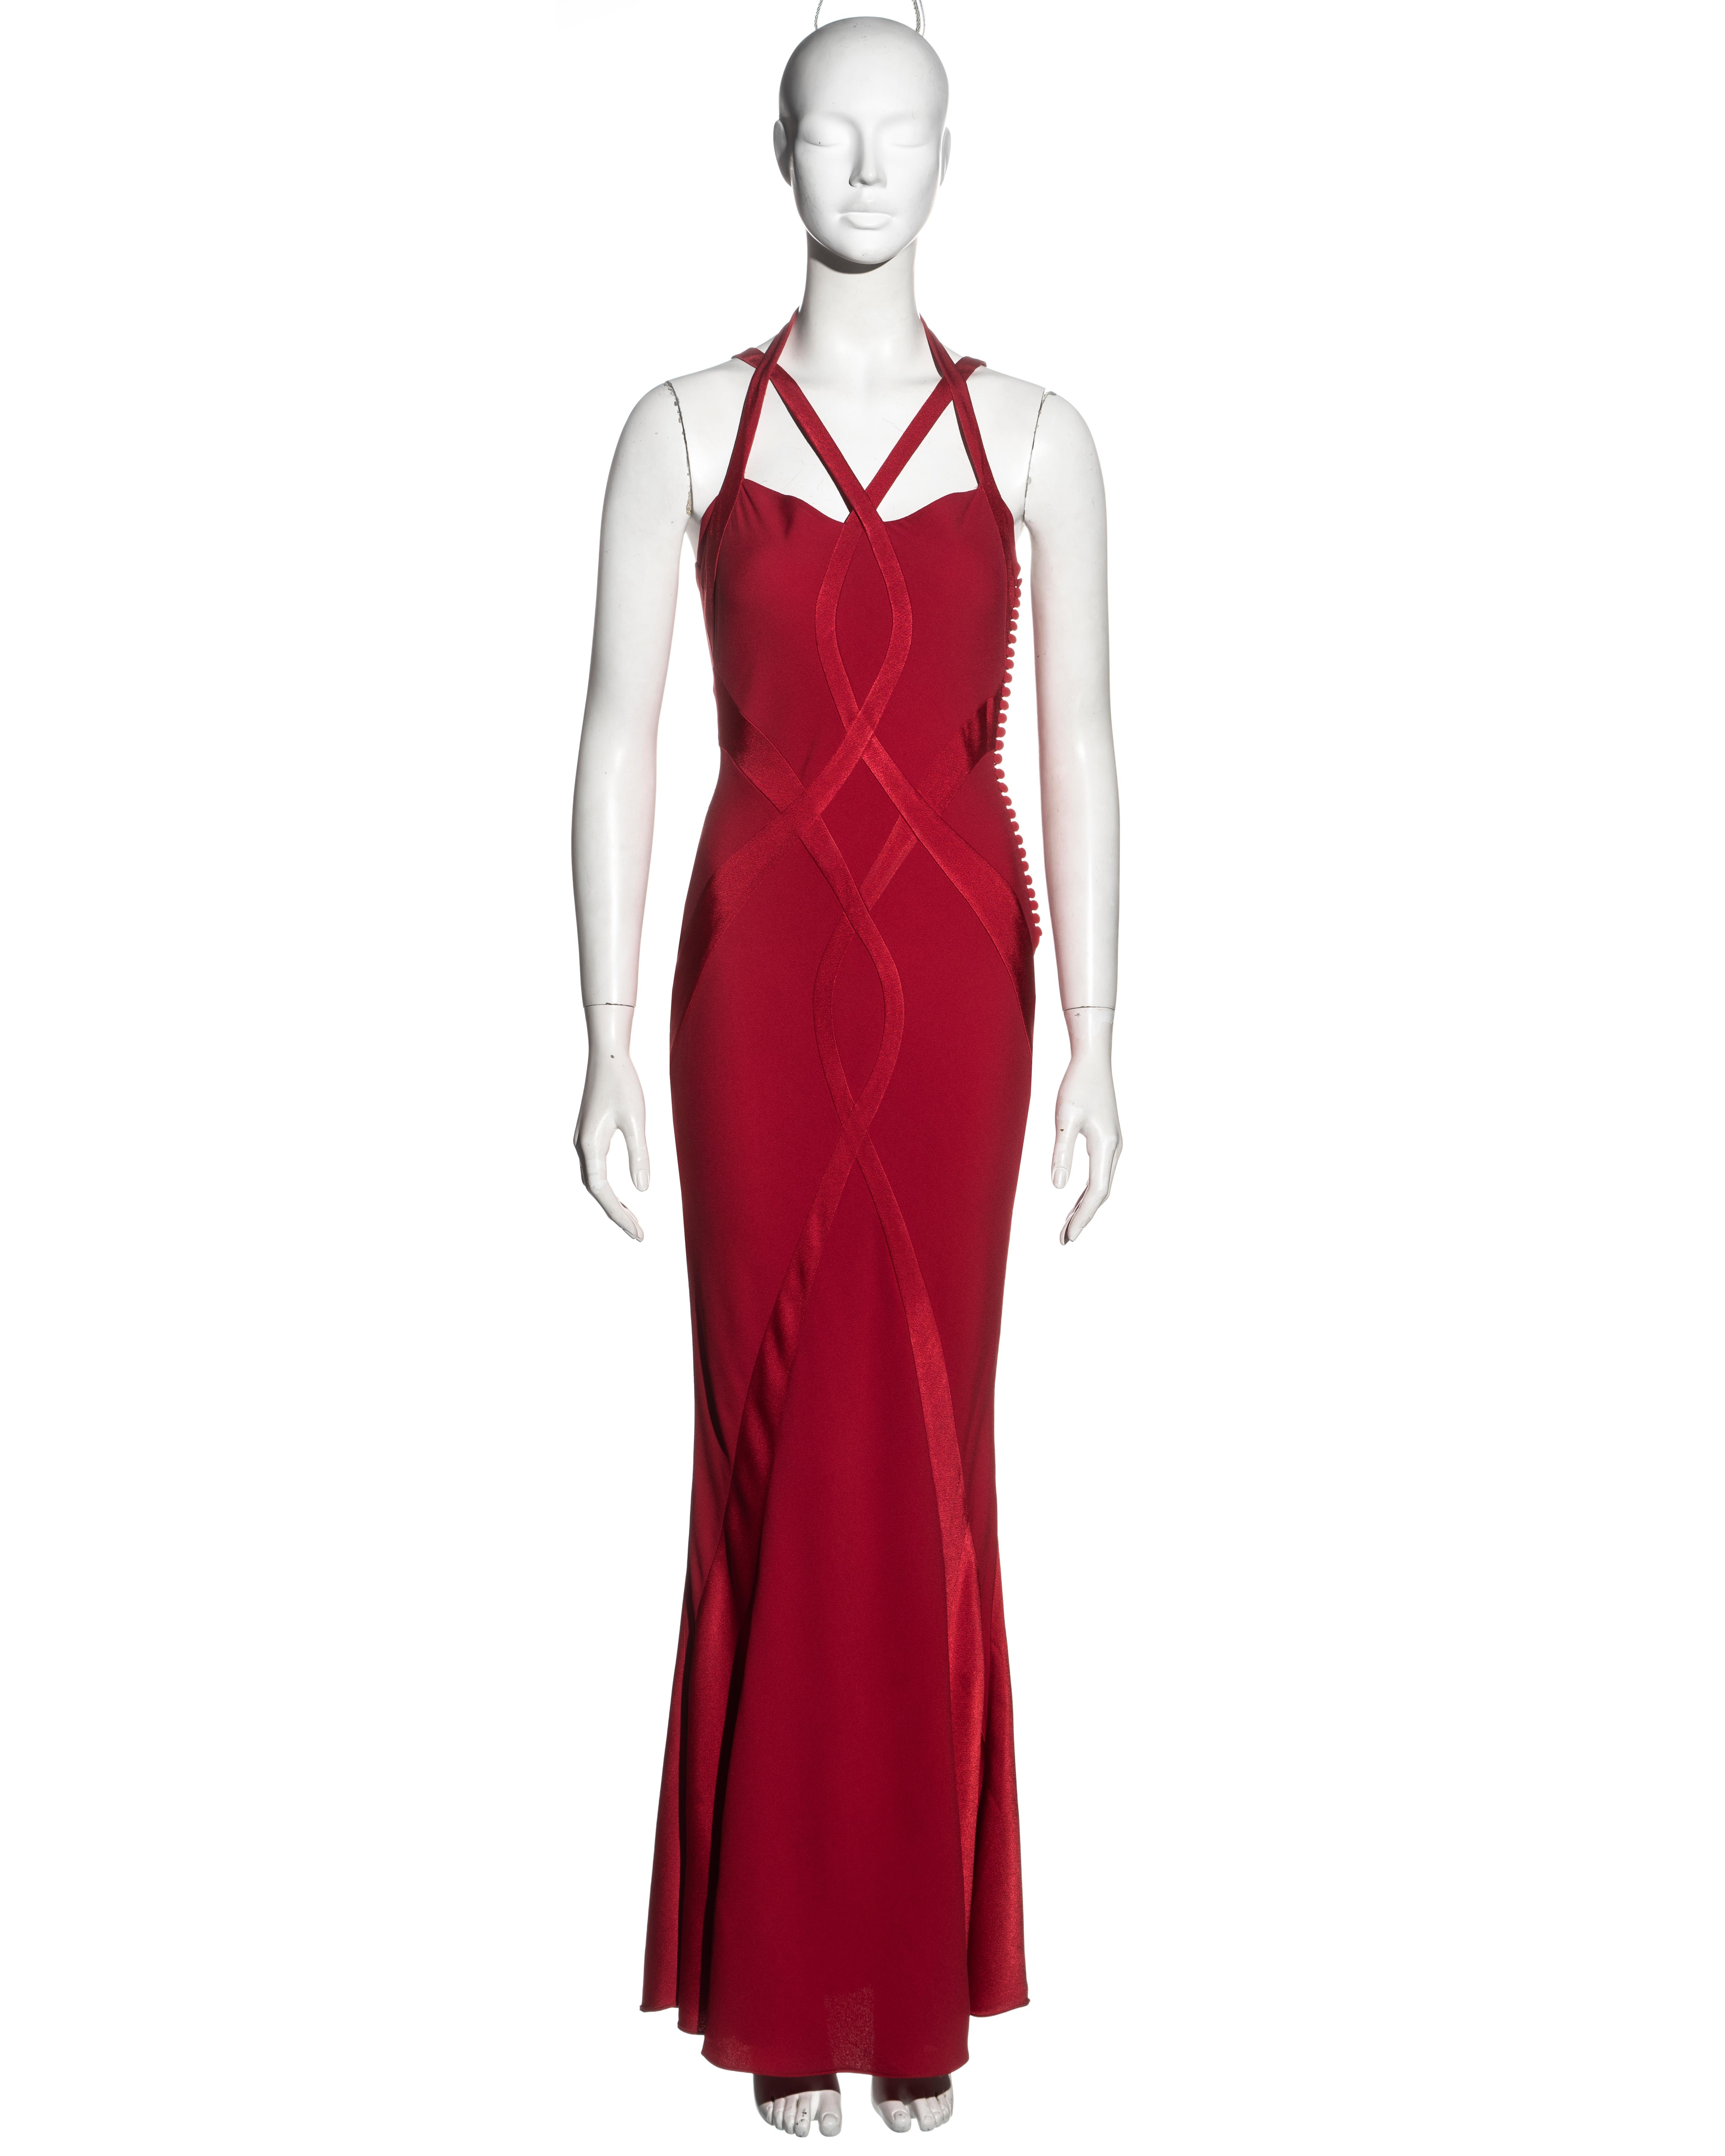 ▪ Christian Dior red evening dress 
▪ Designed by John Galliano
▪ Red satin-backed crepe 
▪ Multiple curved panels 
▪ Halter neck and shoulder straps 
▪ Floor-length skirt 
▪ FR 36 - UK 8 - US 4
▪ Fall-Winter 2004
▪ 68% Acetate, 32% Viscose 
▪ Made